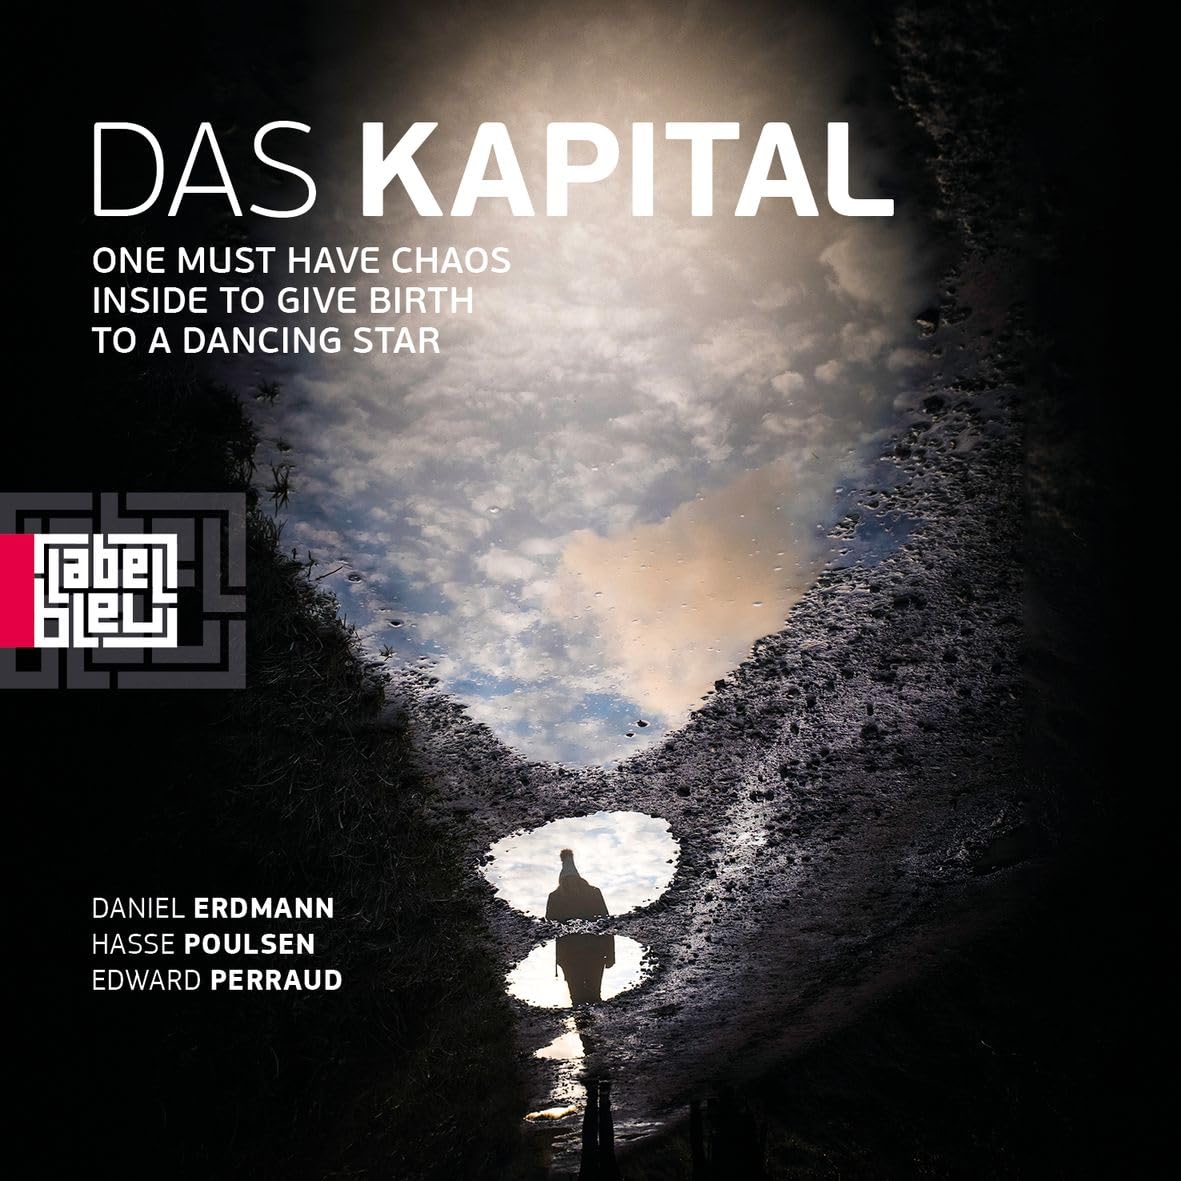 Das Kapital - One Must Have Chaos Inside To Give Birth To A Dancing Star - Import Vinyl LP Record